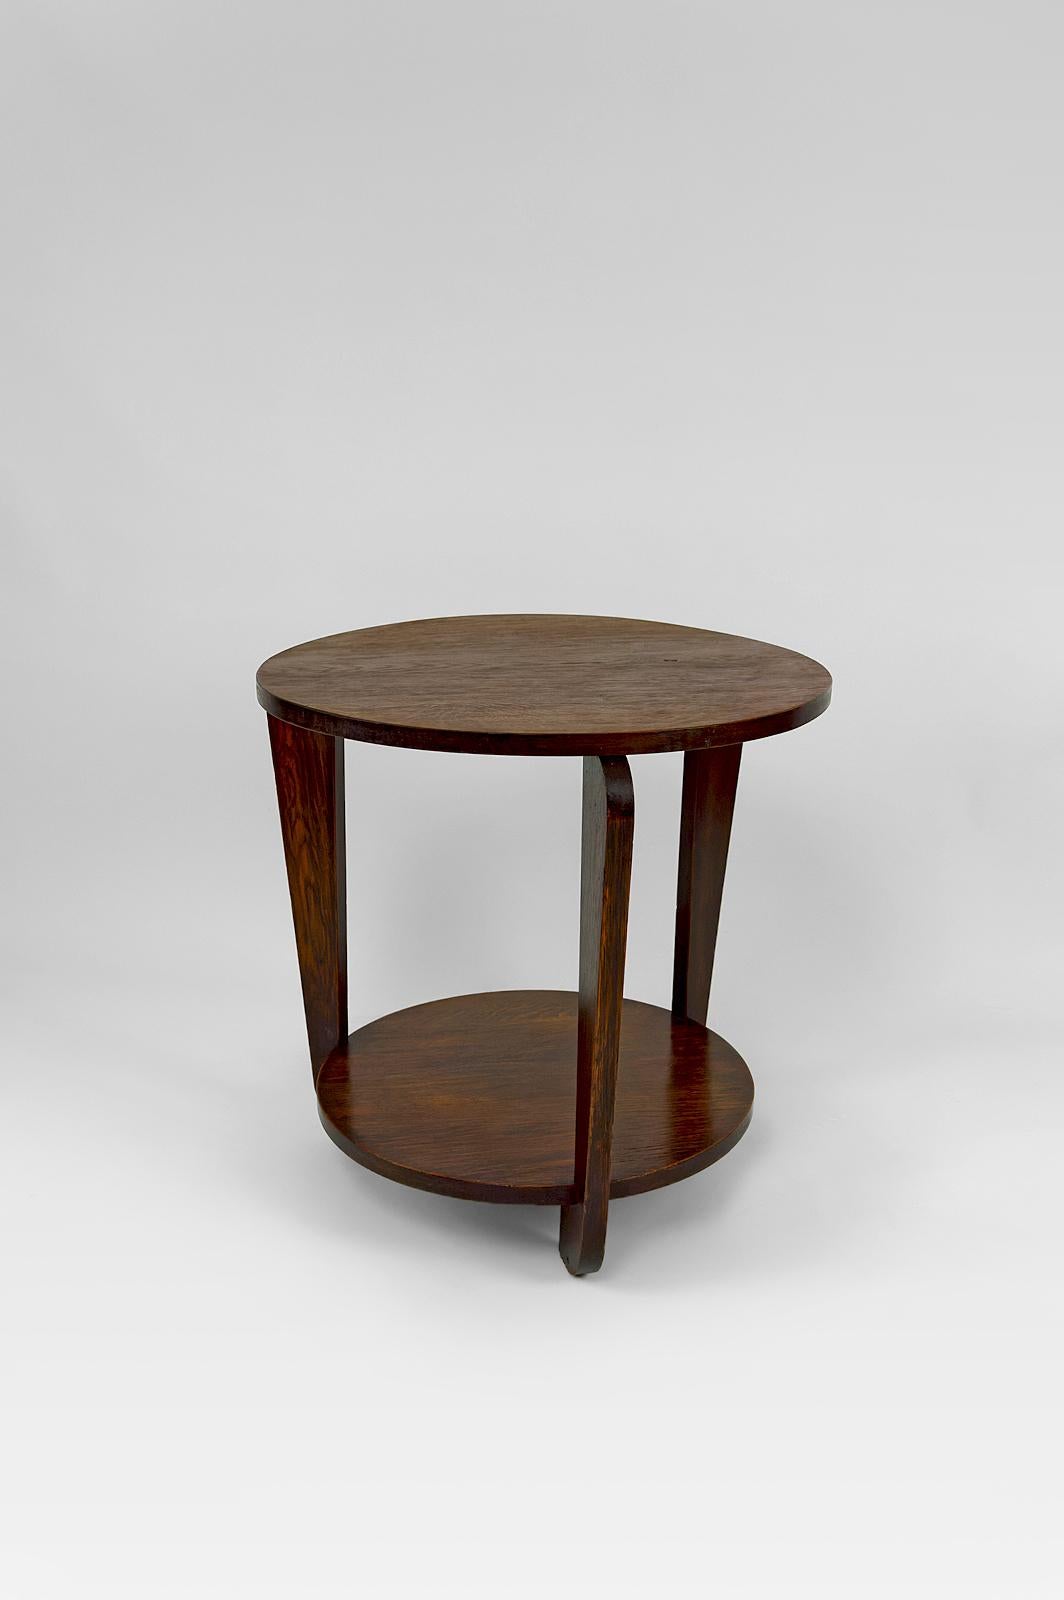 Modernist Art Deco round pedestal table in patinated oak, France, Circa 1930 For Sale 1